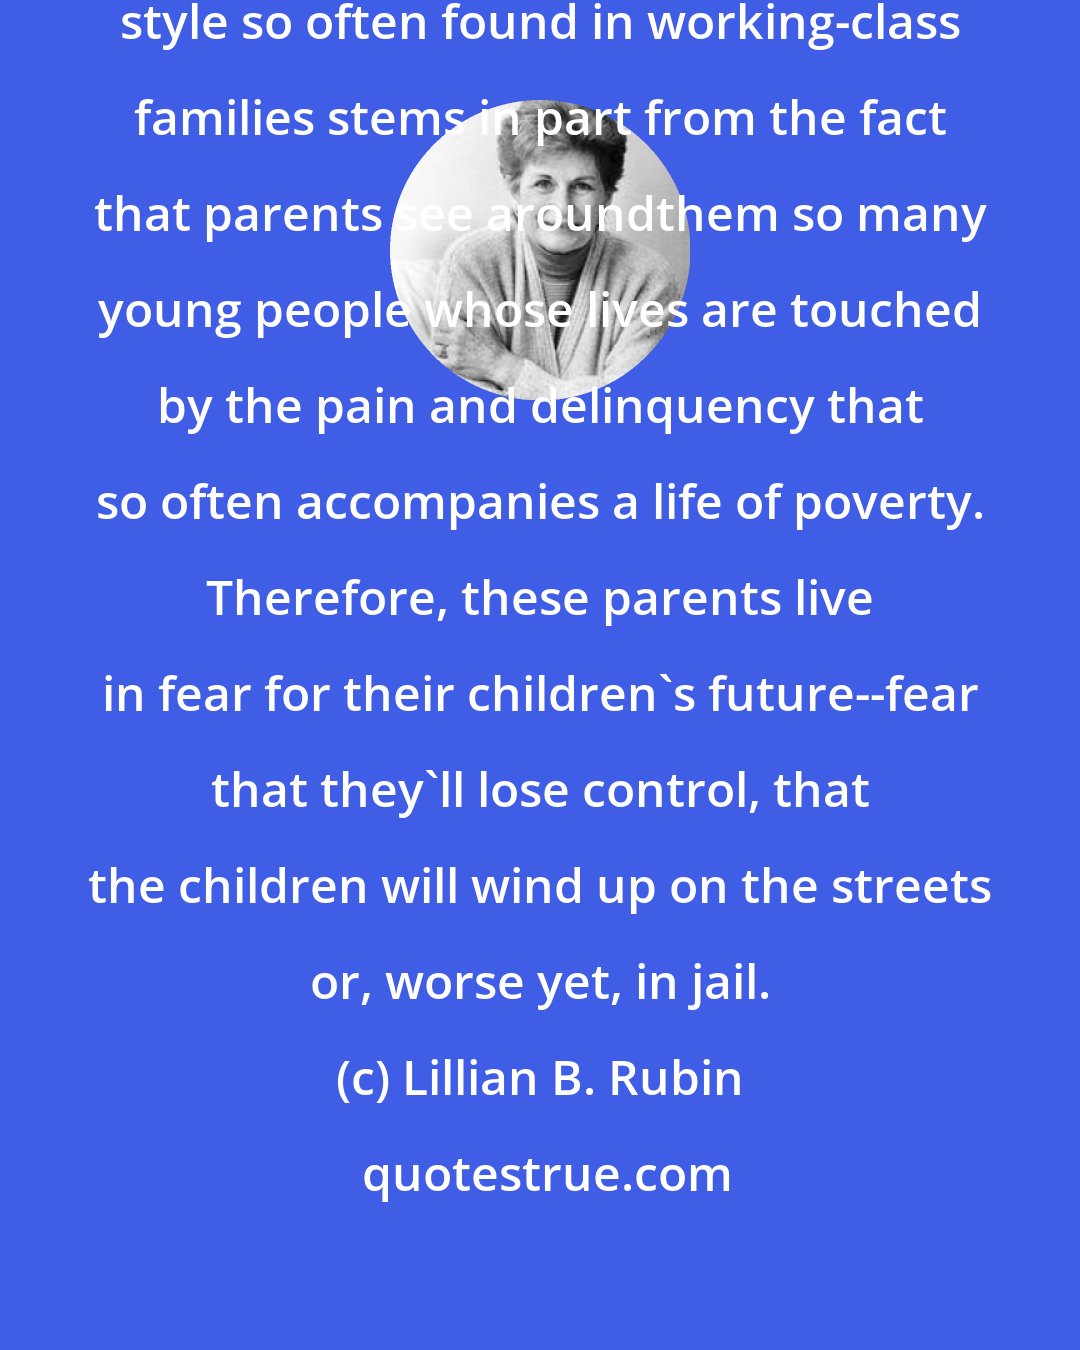 Lillian B. Rubin: The authoritarian child-rearing style so often found in working-class families stems in part from the fact that parents see aroundthem so many young people whose lives are touched by the pain and delinquency that so often accompanies a life of poverty. Therefore, these parents live in fear for their children's future--fear that they'll lose control, that the children will wind up on the streets or, worse yet, in jail.